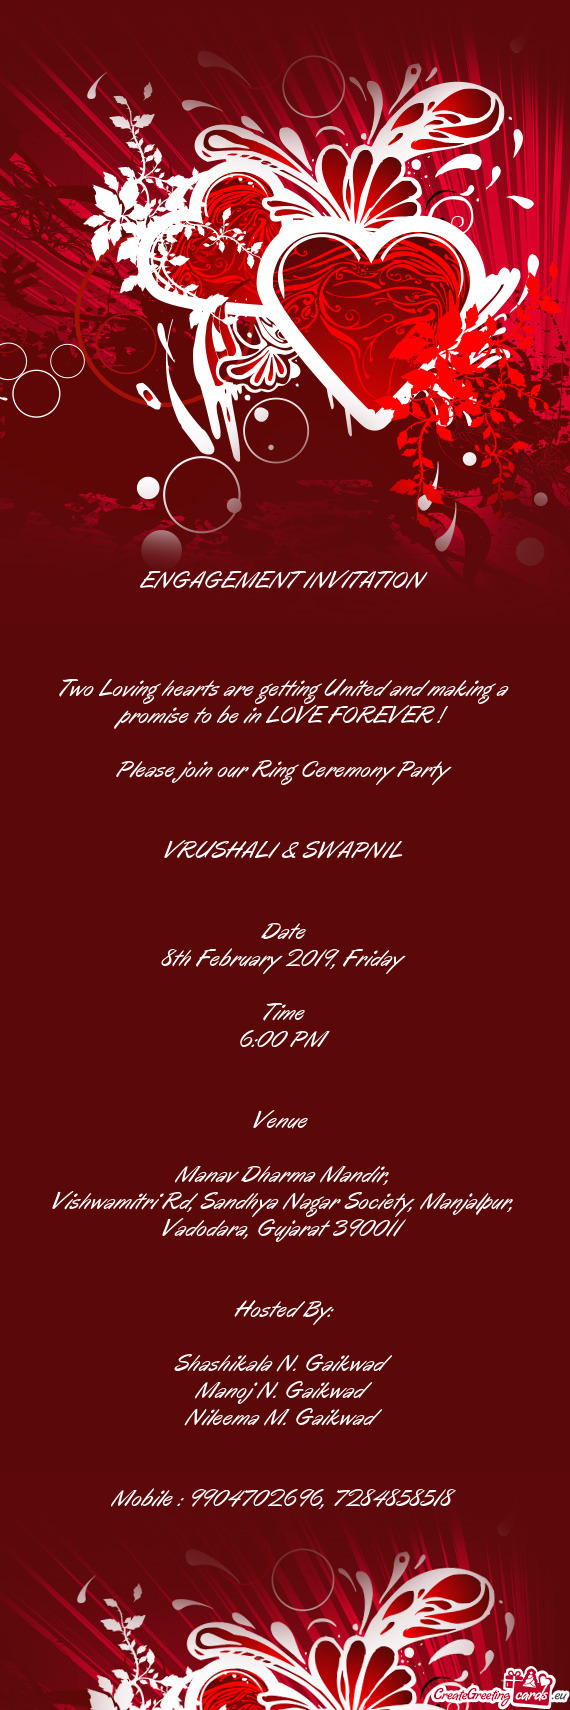 ENGAGEMENT INVITATION         Two Loving hearts are